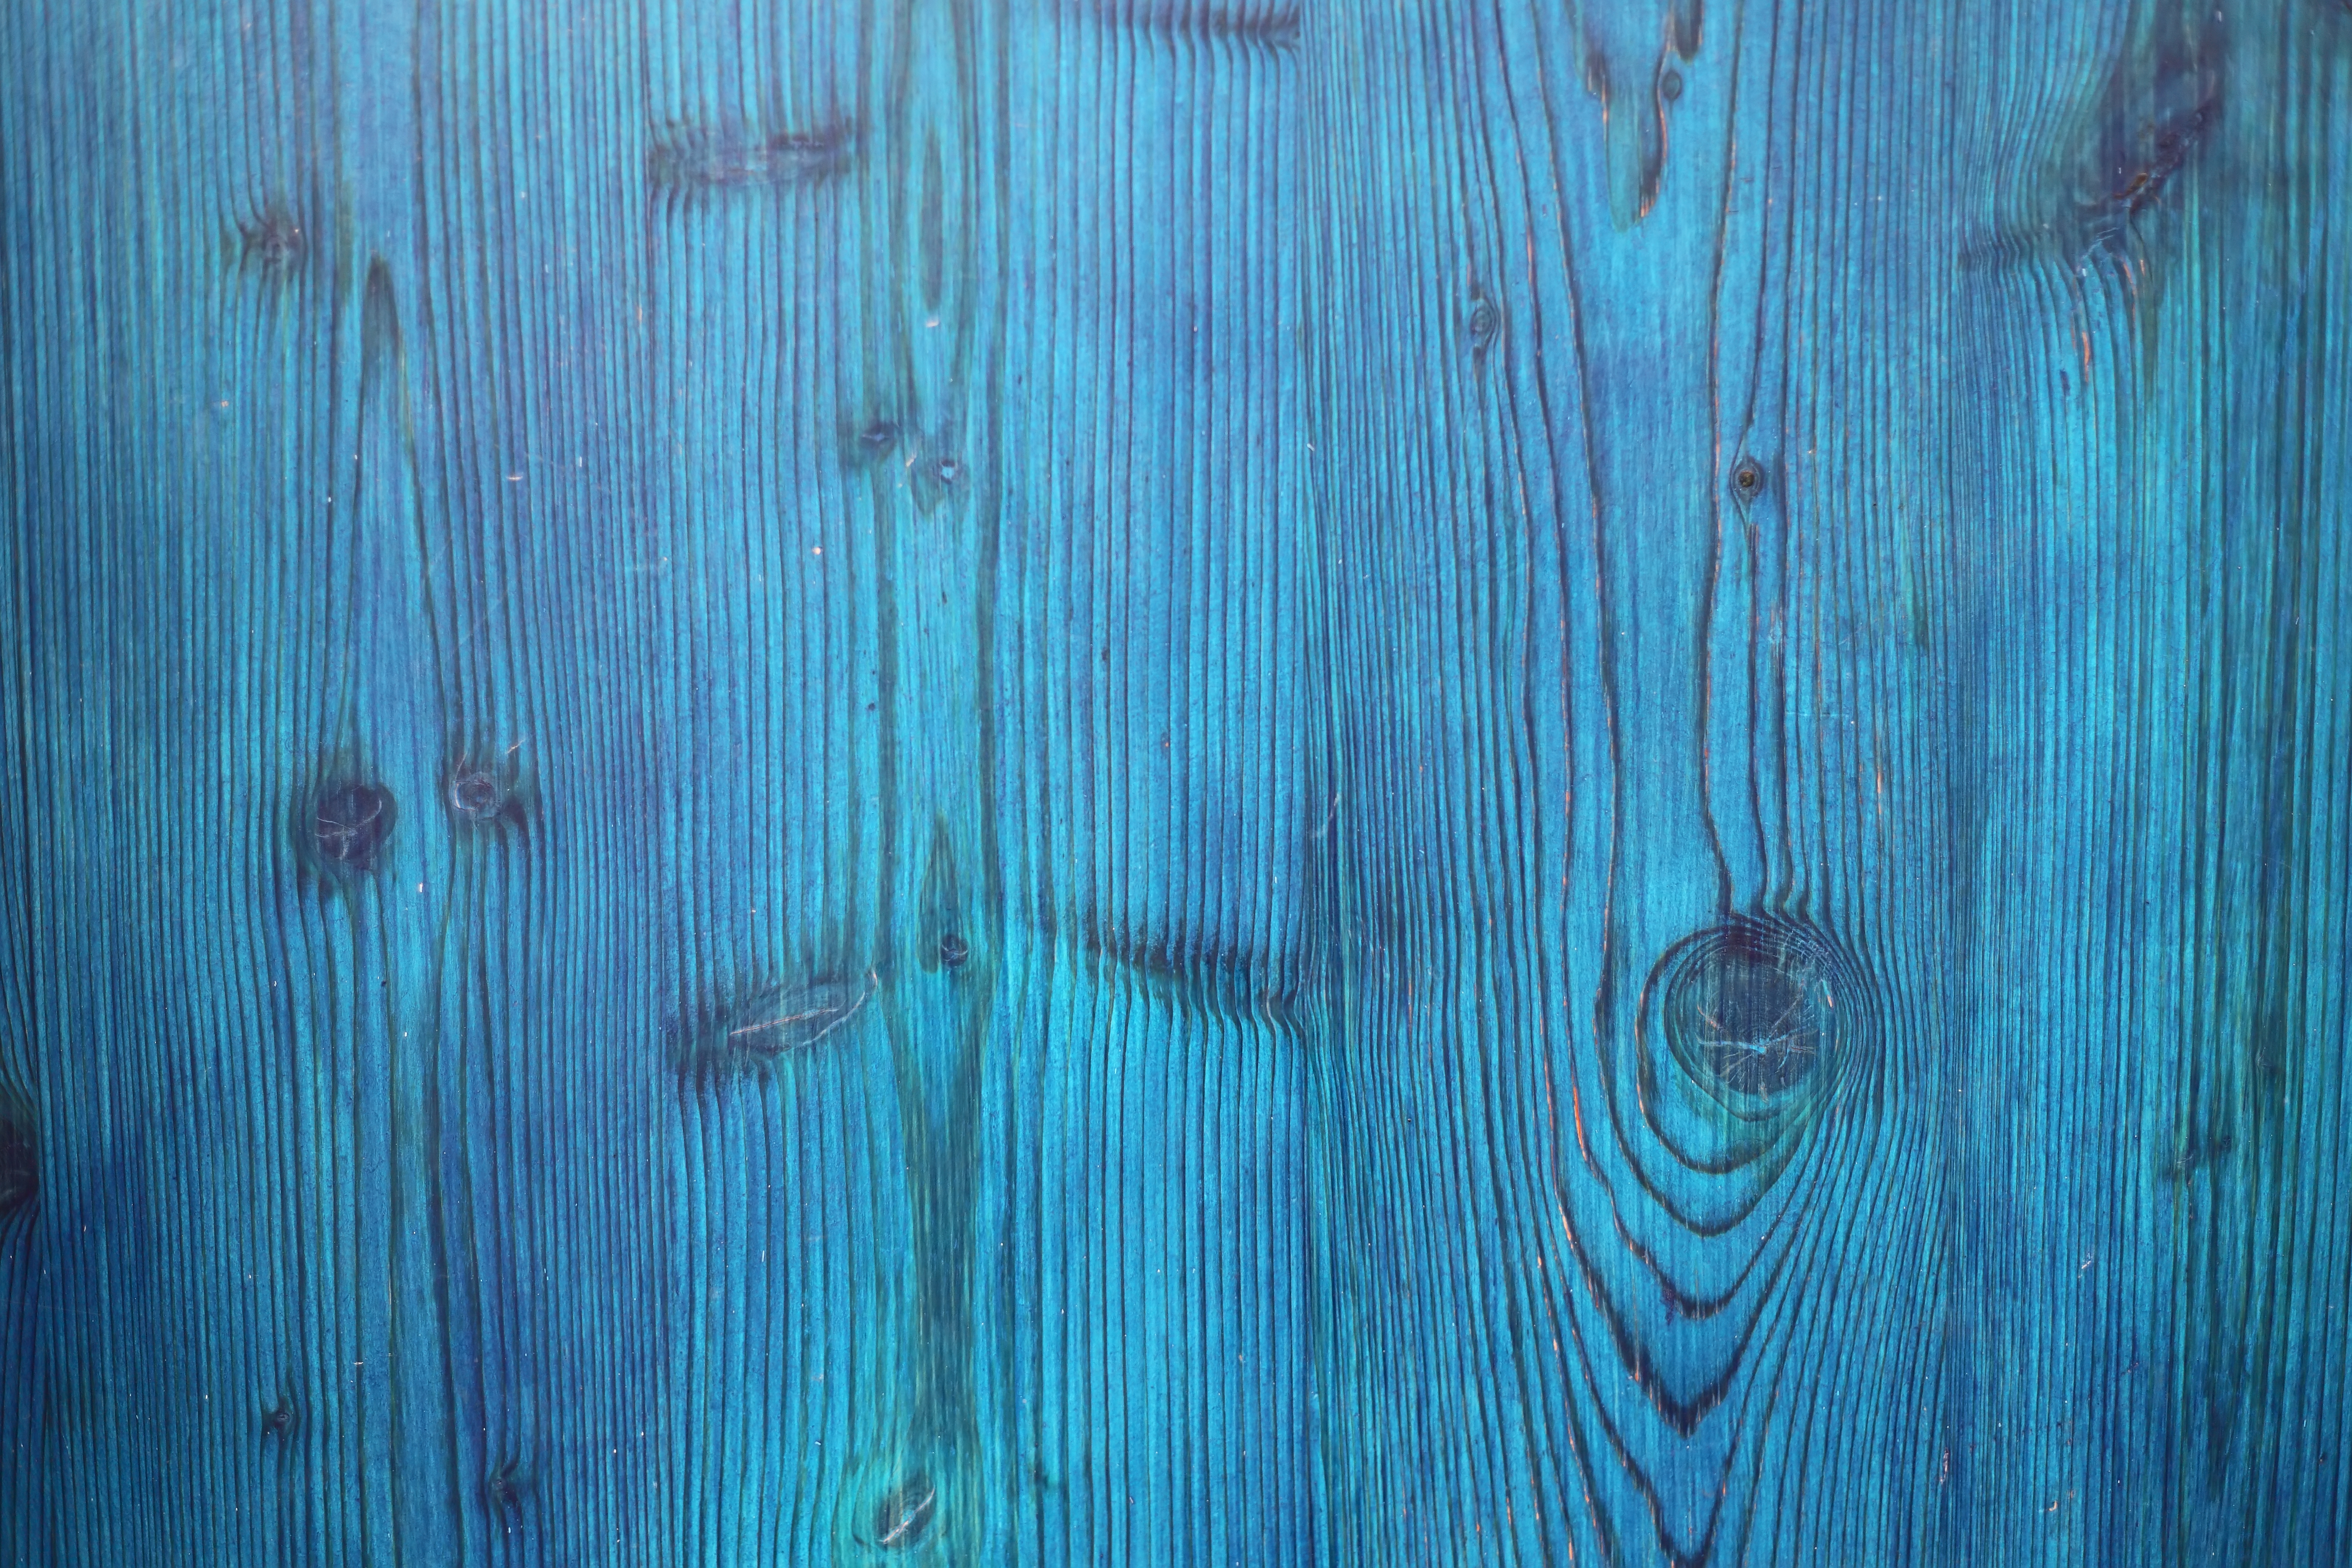 planks, board, blue, wood, wooden, tree, texture, textures, surface